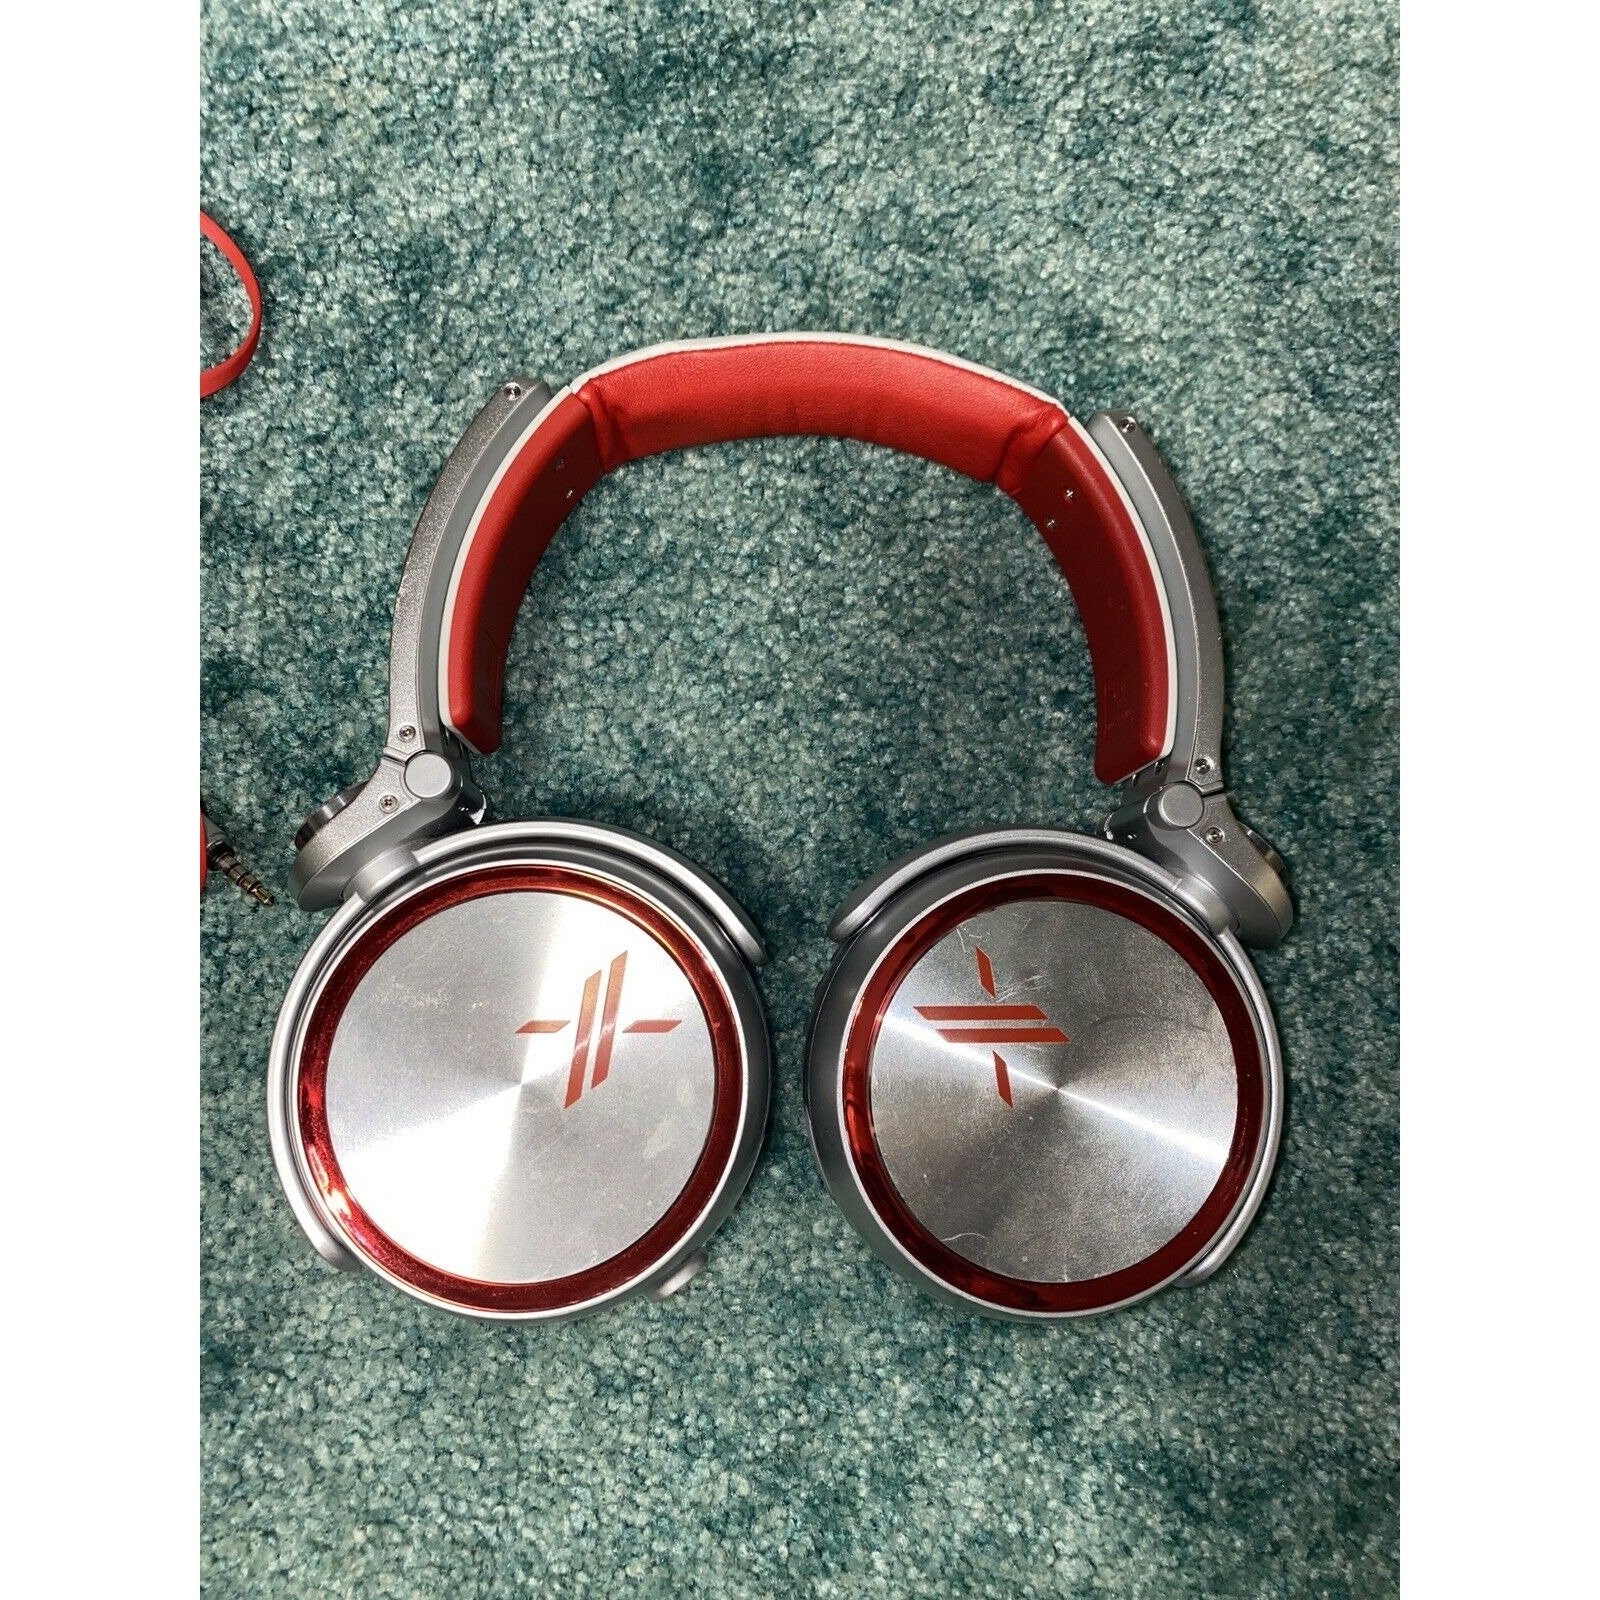 Sony MDR-X10 Foldable Headphones - Red/Silver